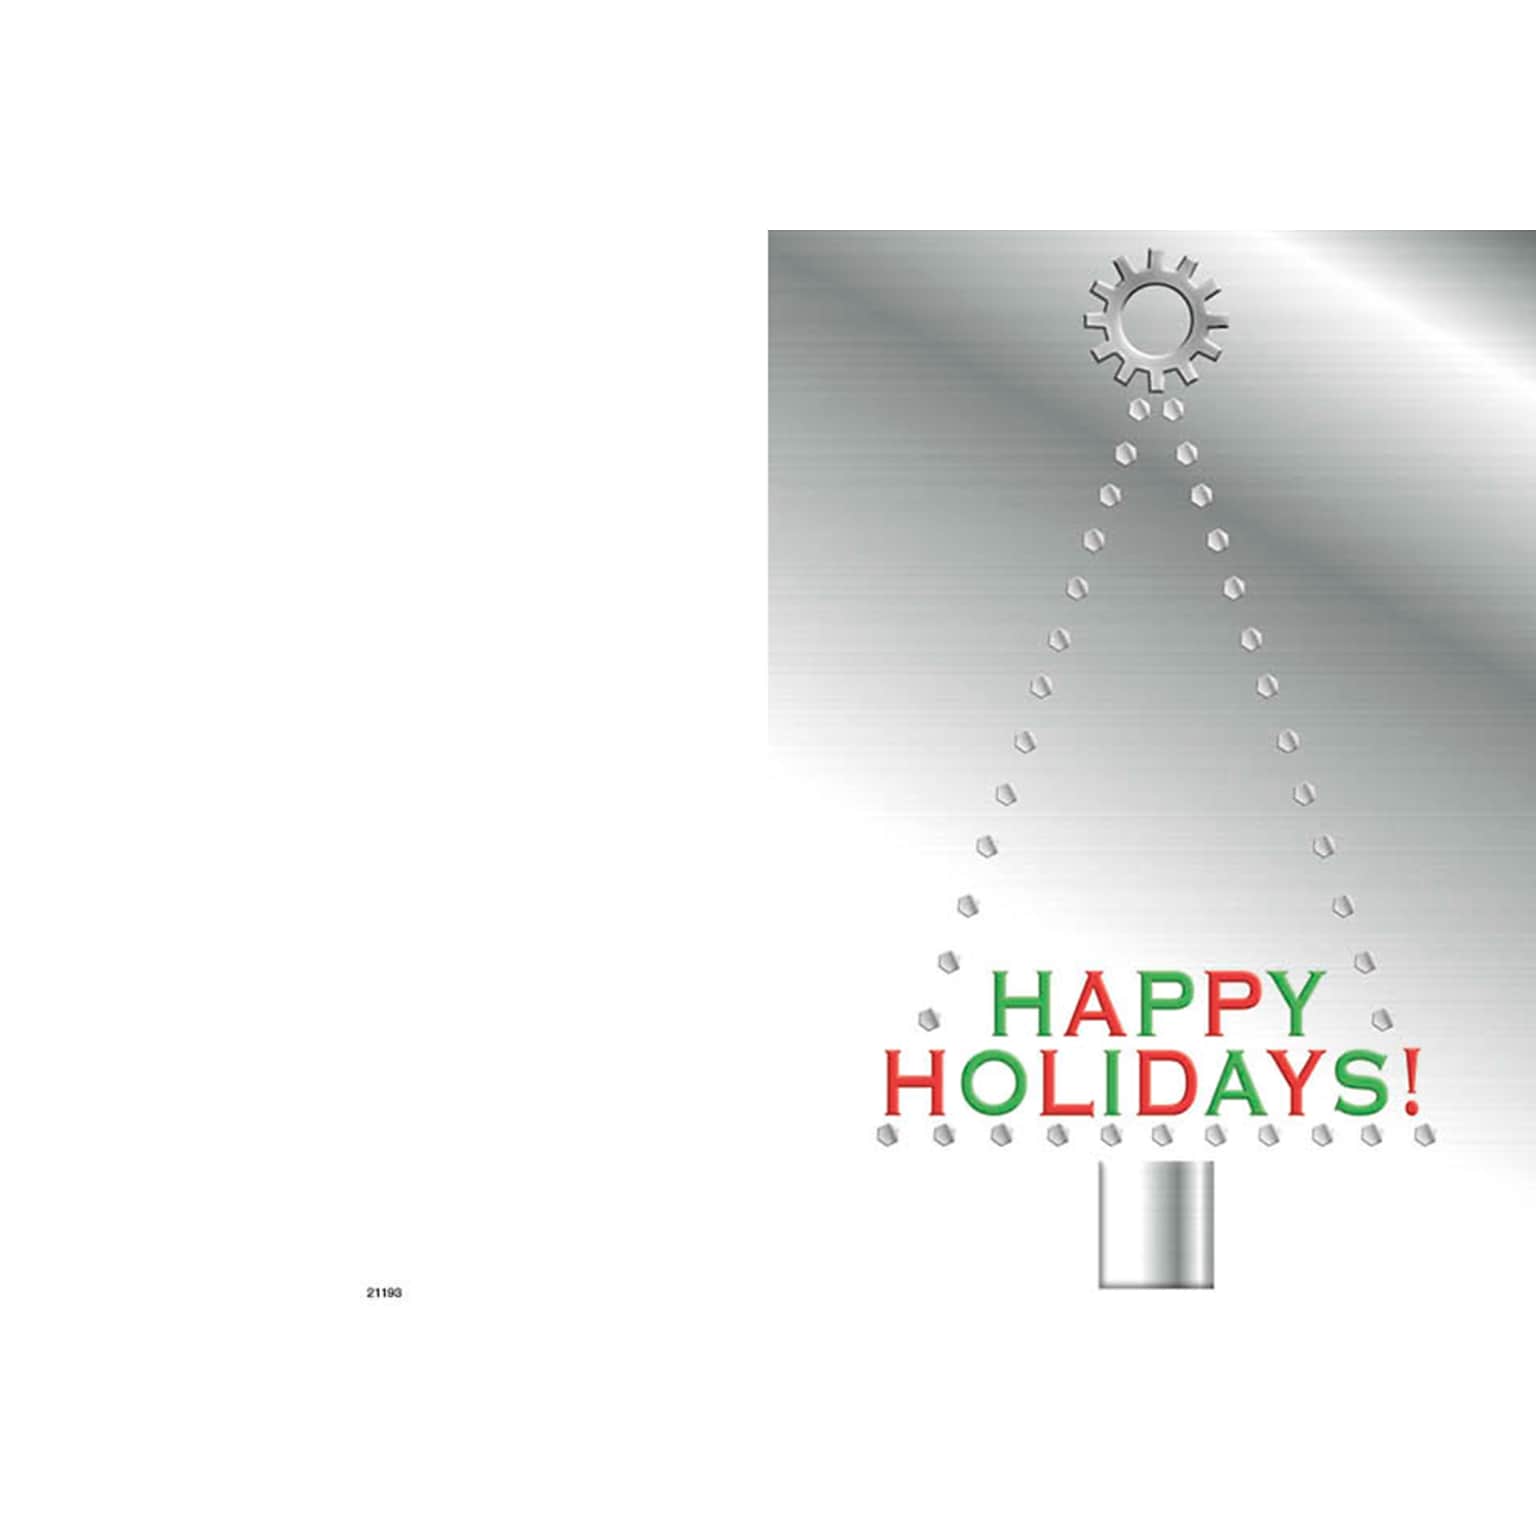 Happy Holidays - dotted christmas tree with gear - 7 x 10 scored for folding to 7 x 5, 25 cards w/A7 envelopes per set